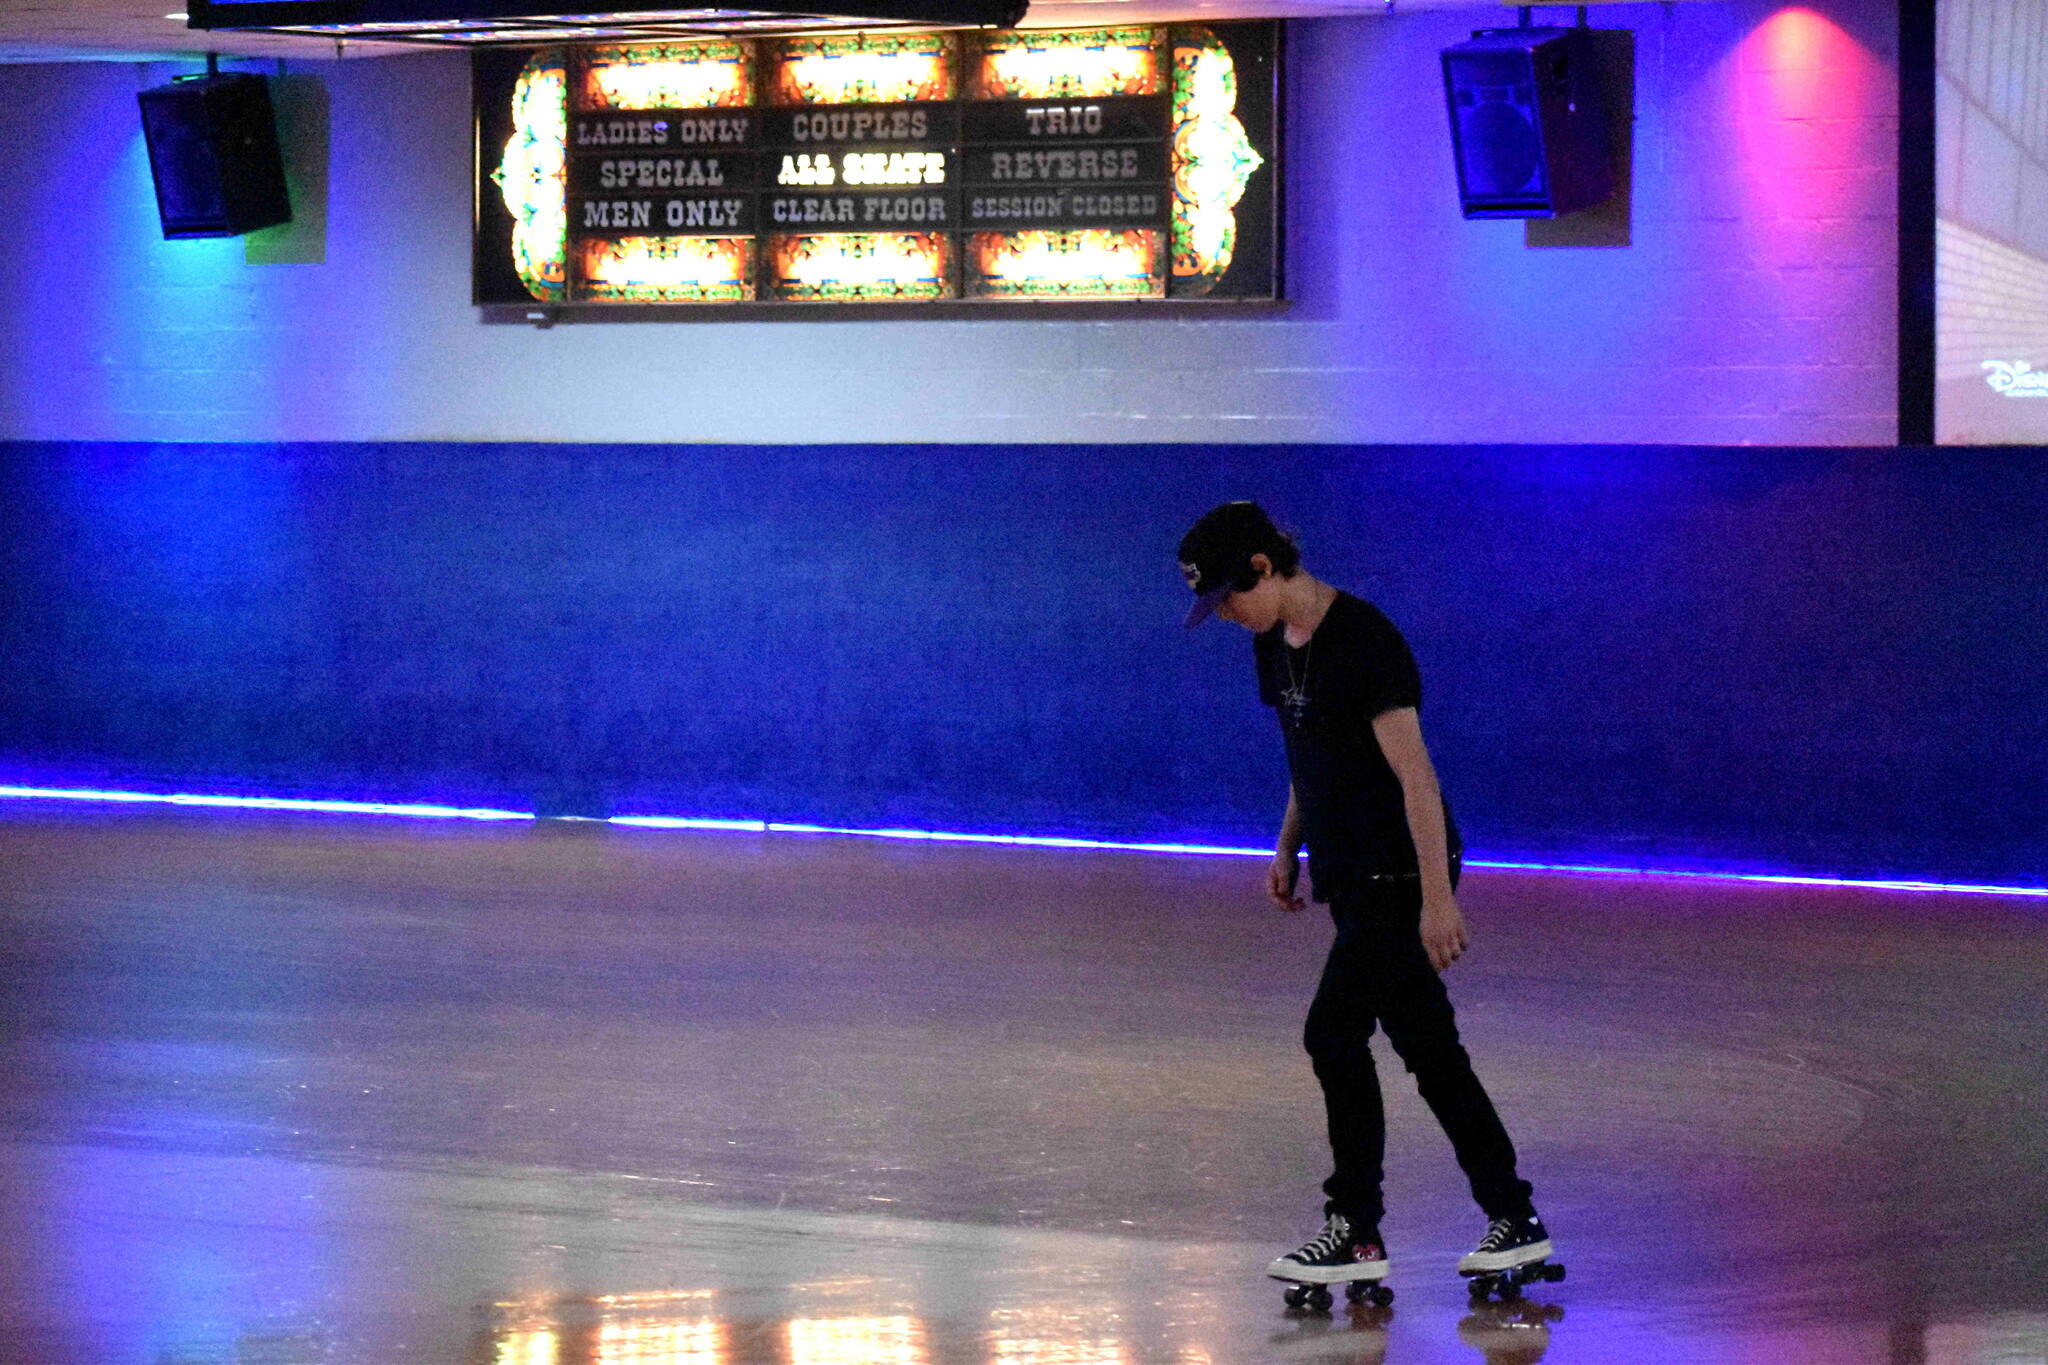 T.K., an employee at Pattison’s West, practices some moves before the rink opens Tuesday afternoon. Alex Bruell/Sound Publishing